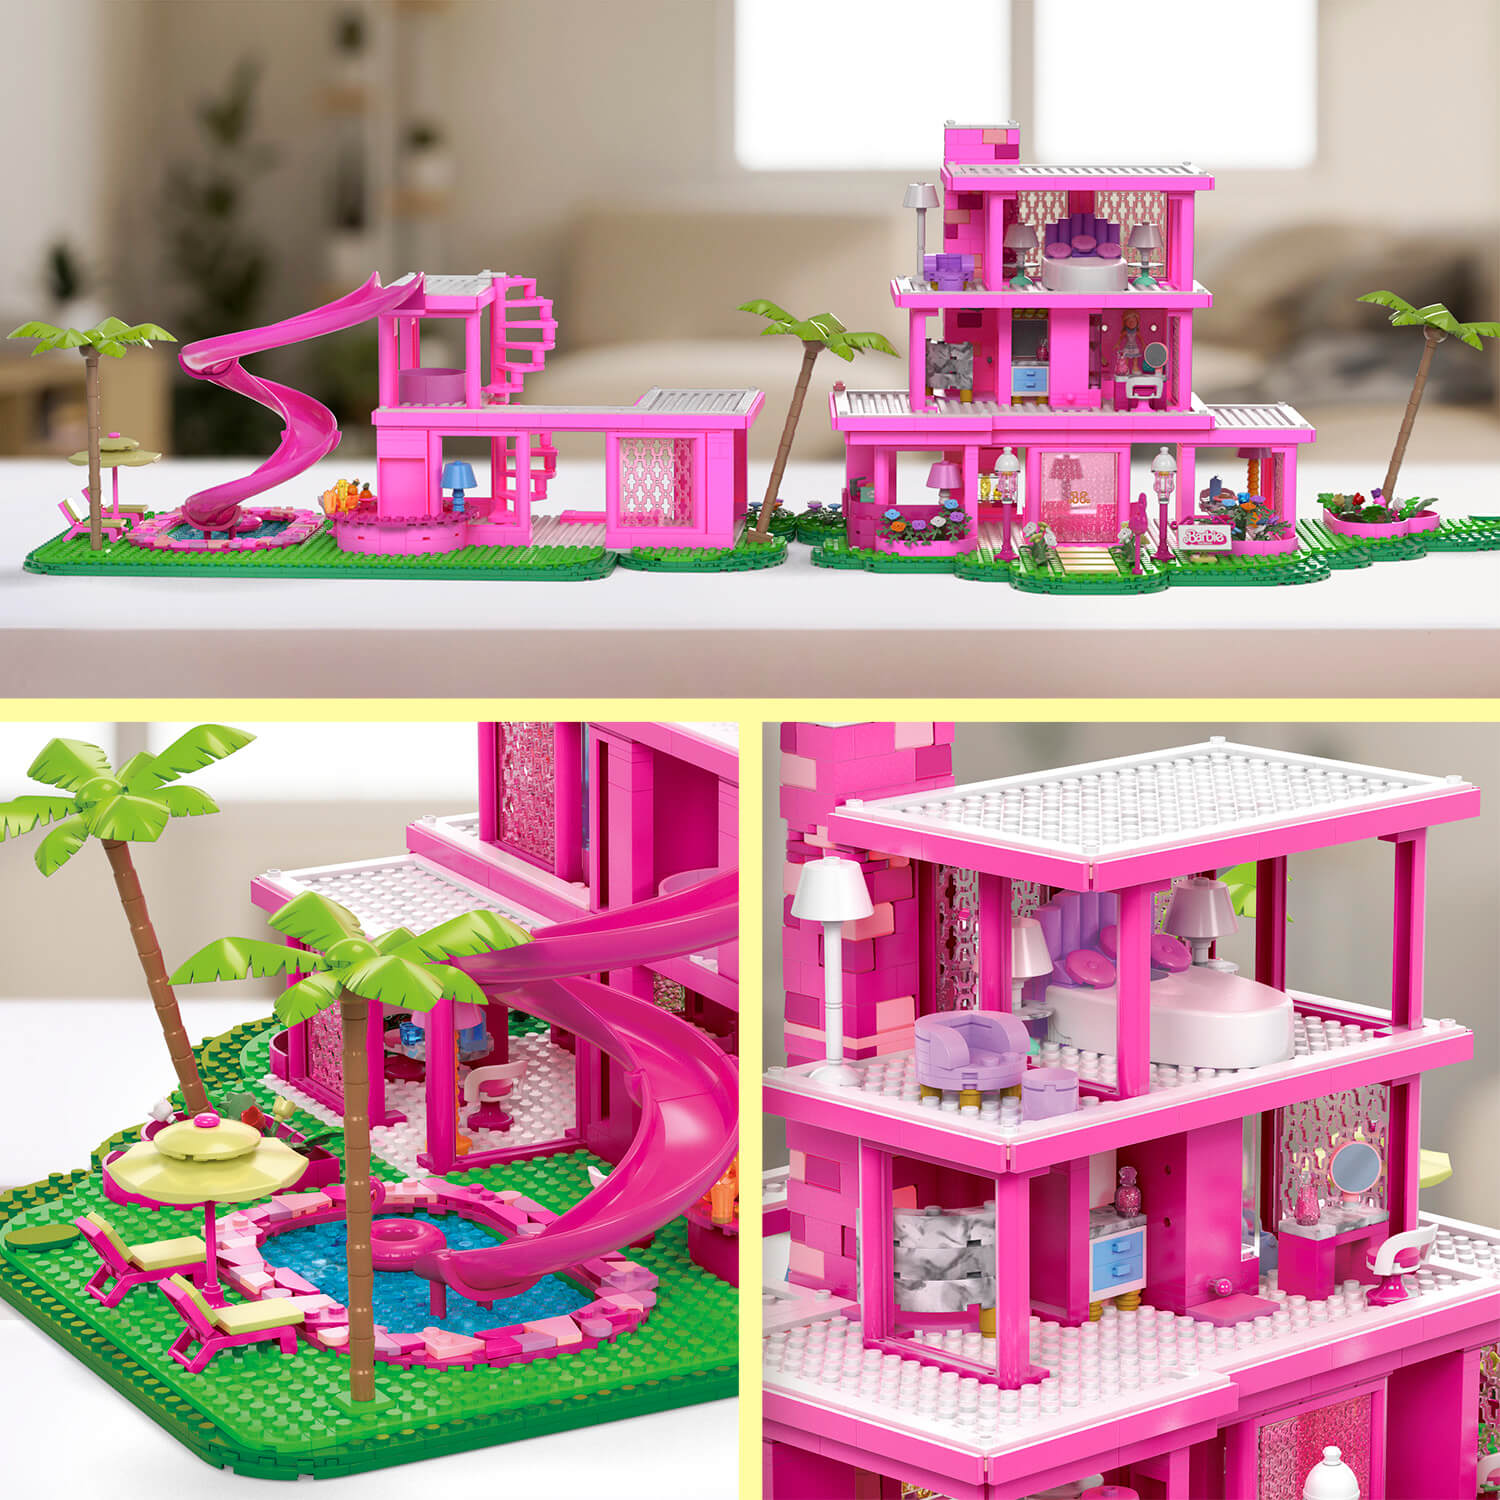 Barbie Dreamhouse Playset $125 Shipped at